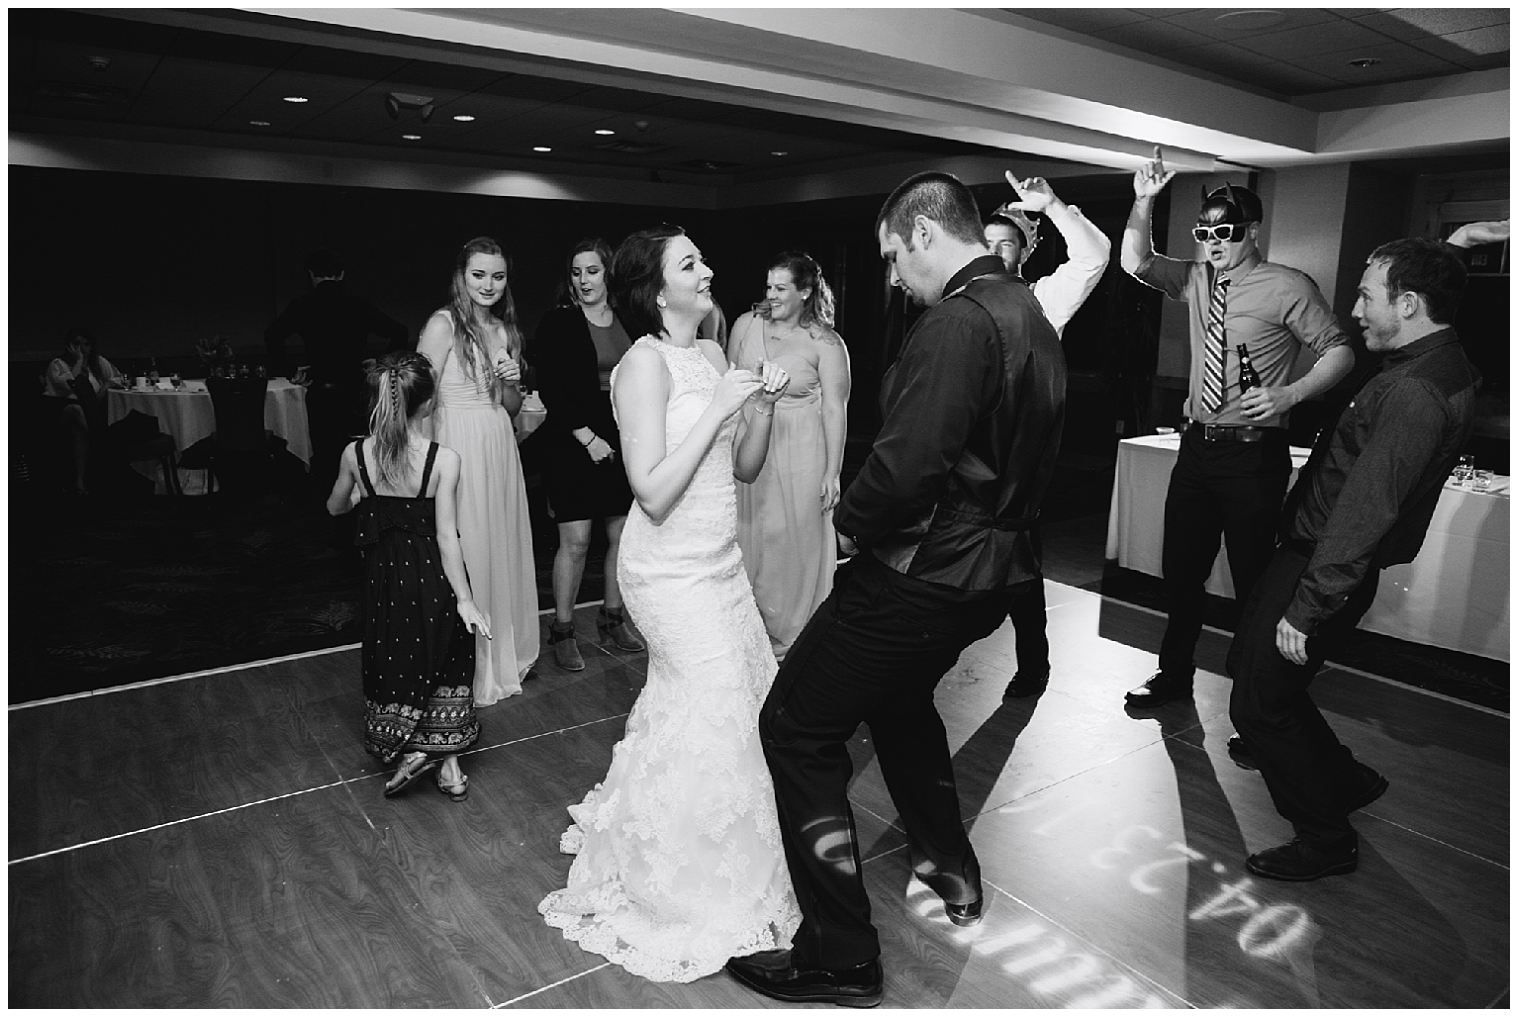 The bride and groom dance with their guests at their Sevens in Breckenridge wedding reception.